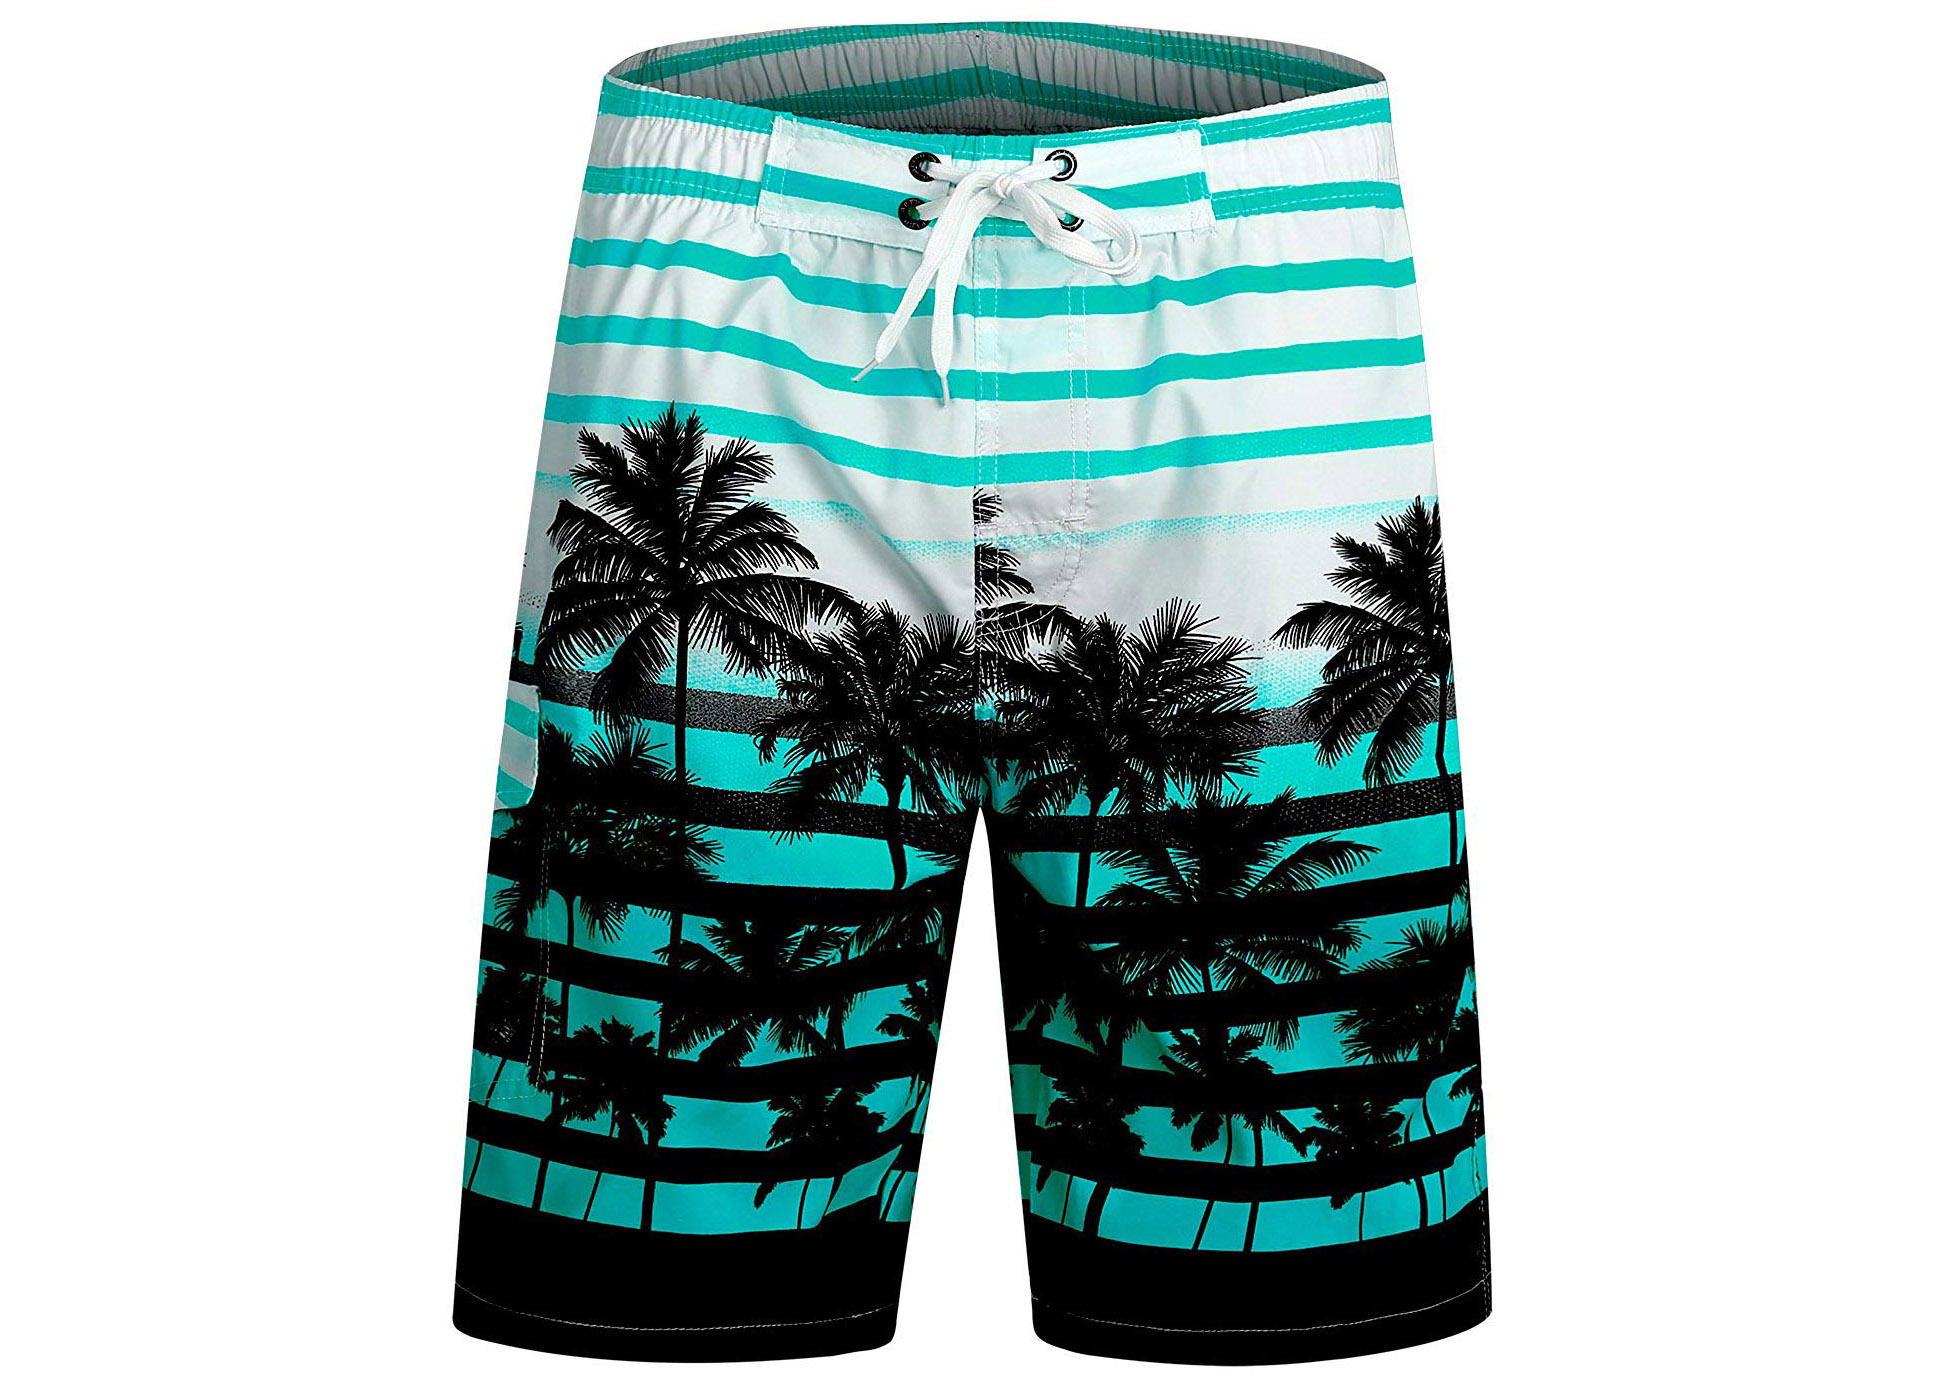 The Best Men's Swim Trunks For Chilling At The Pool Or The Beach This ...